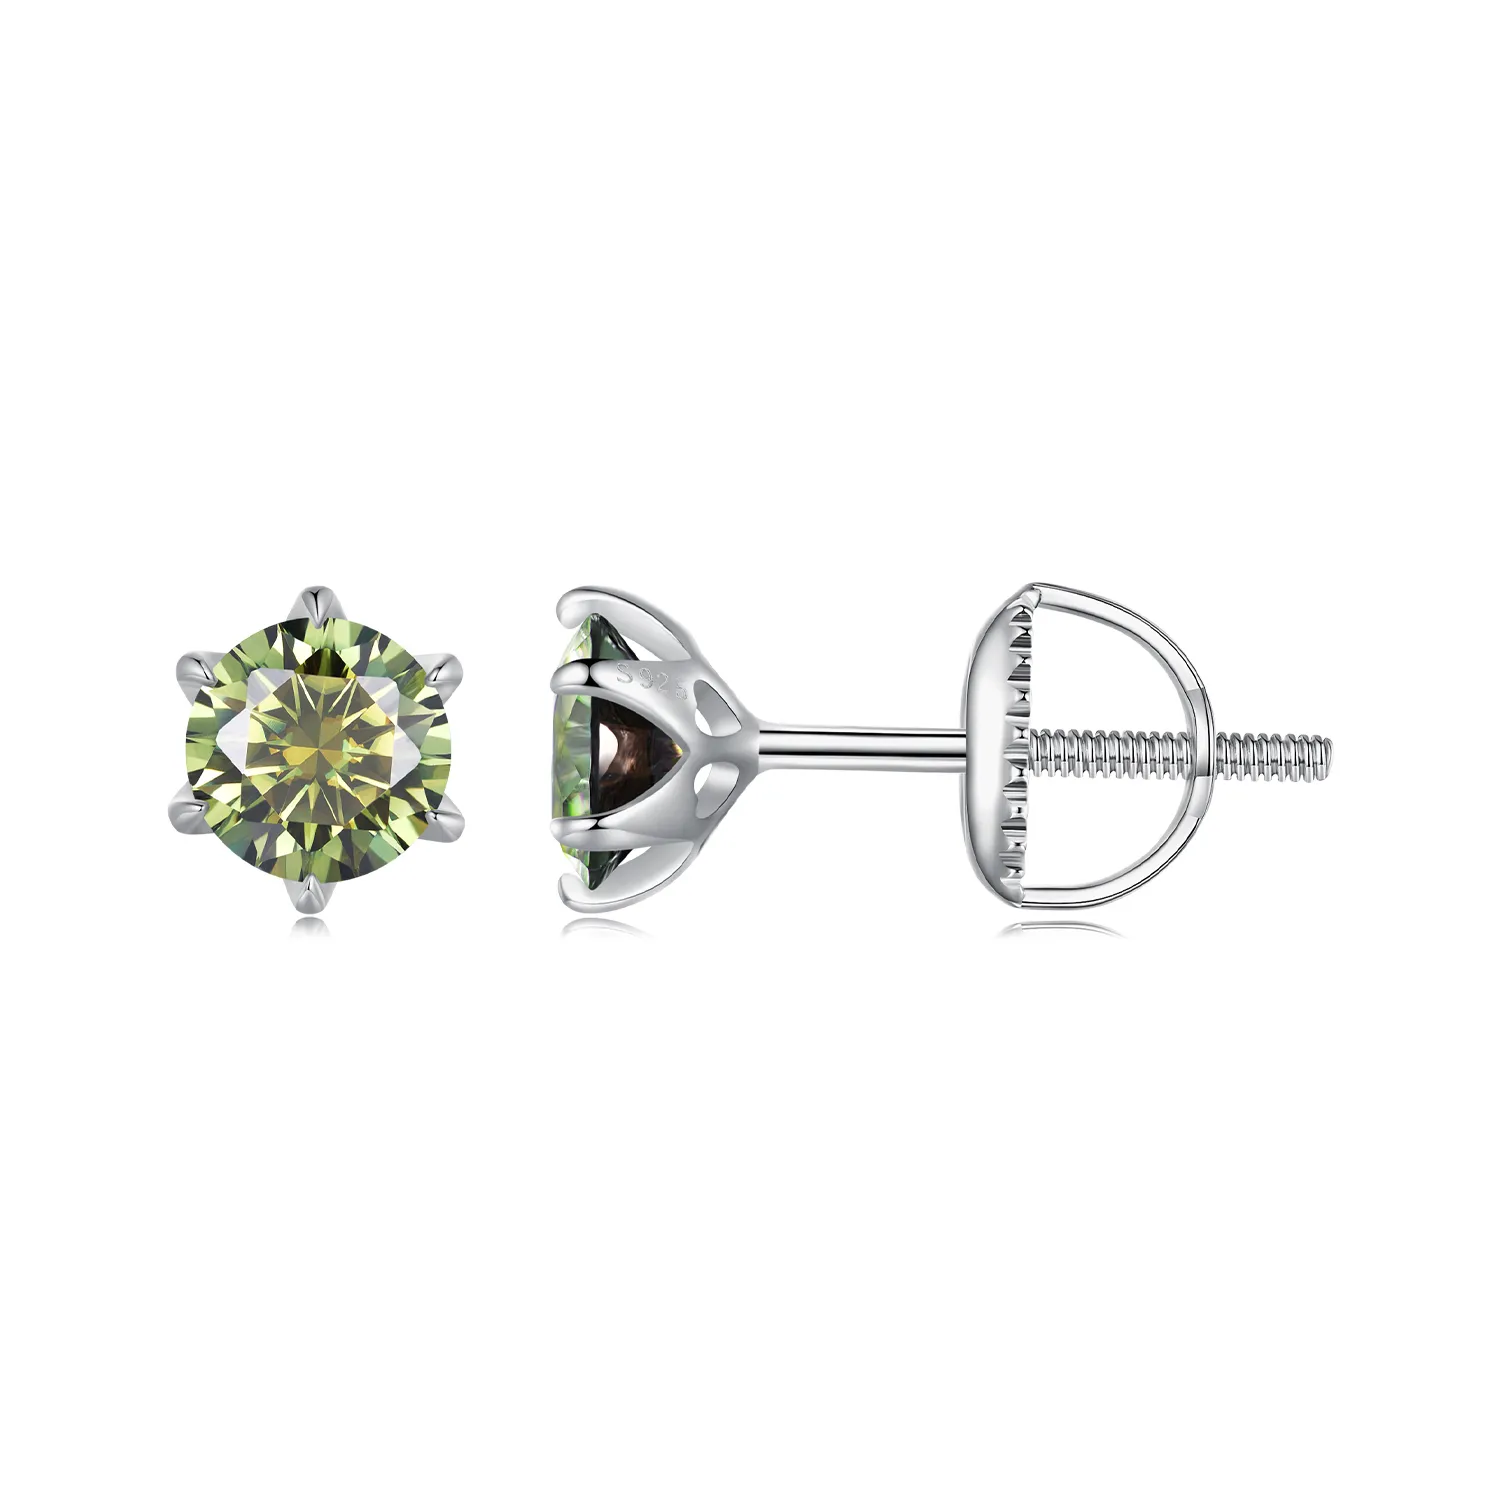 Pandora Style Emeraldmoissanite Studs Earrings - MSE025-SGN